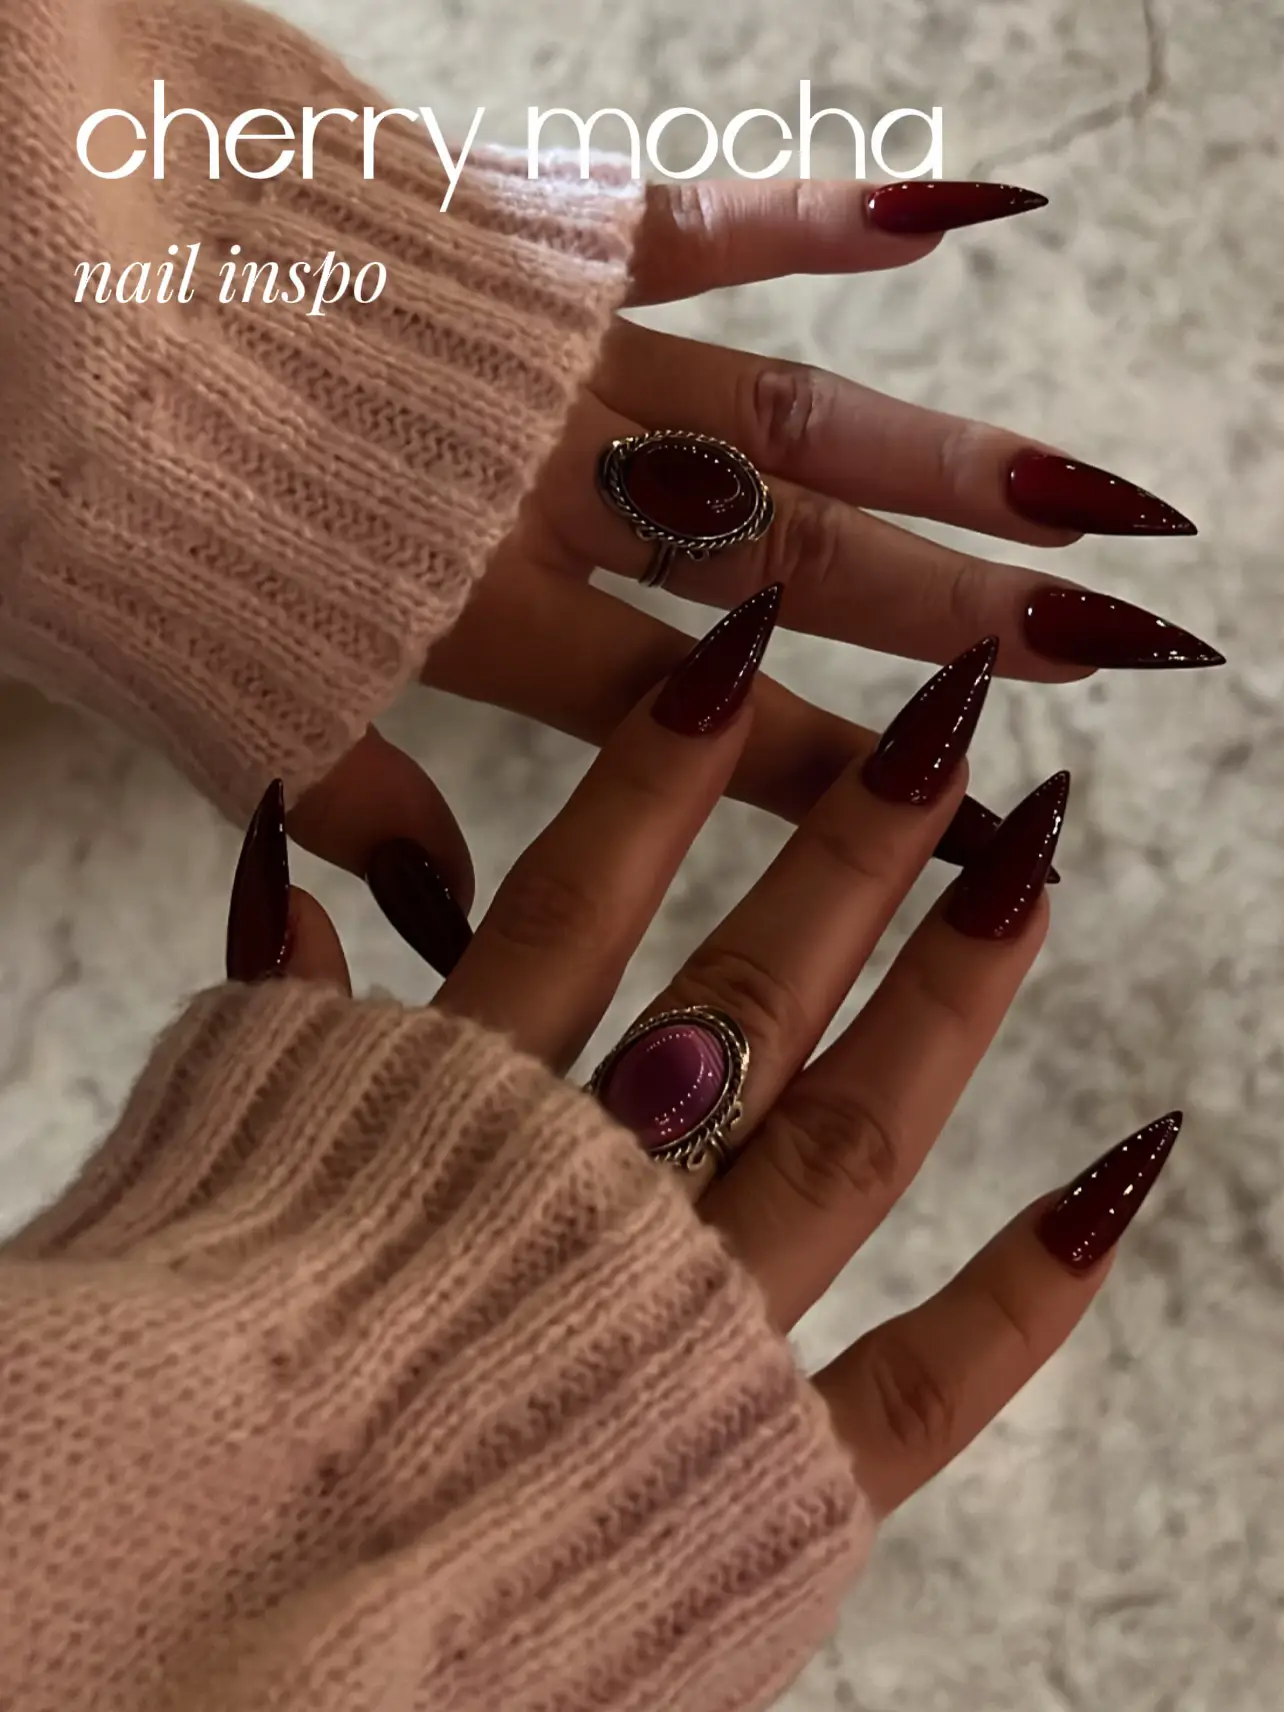 TikTok Is Obsessed With This Cherry Mocha Nail Polish